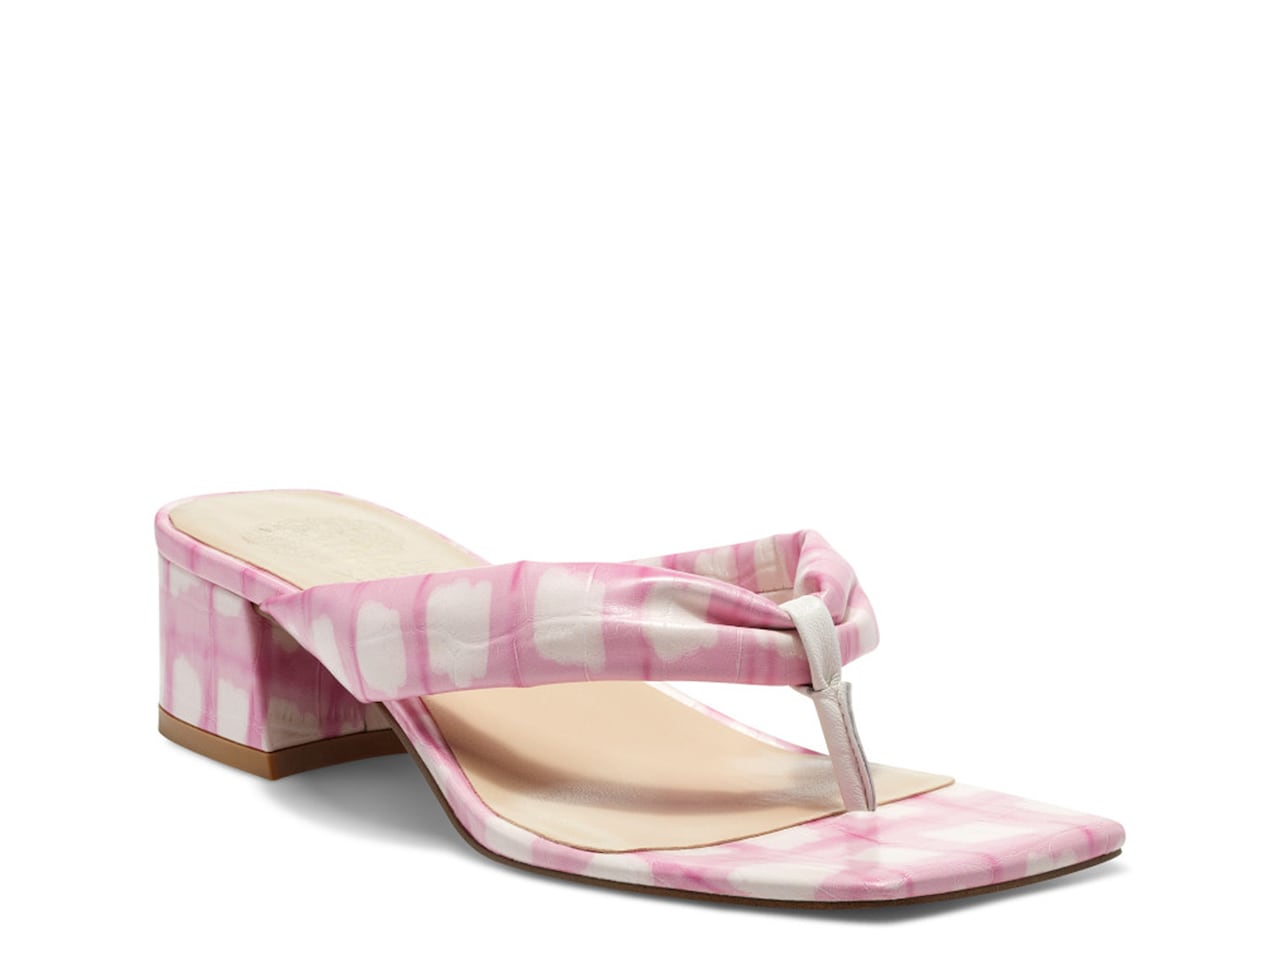 Vince Camuto // Sabrinda Sandal. 55% Off Right Now! $44.98